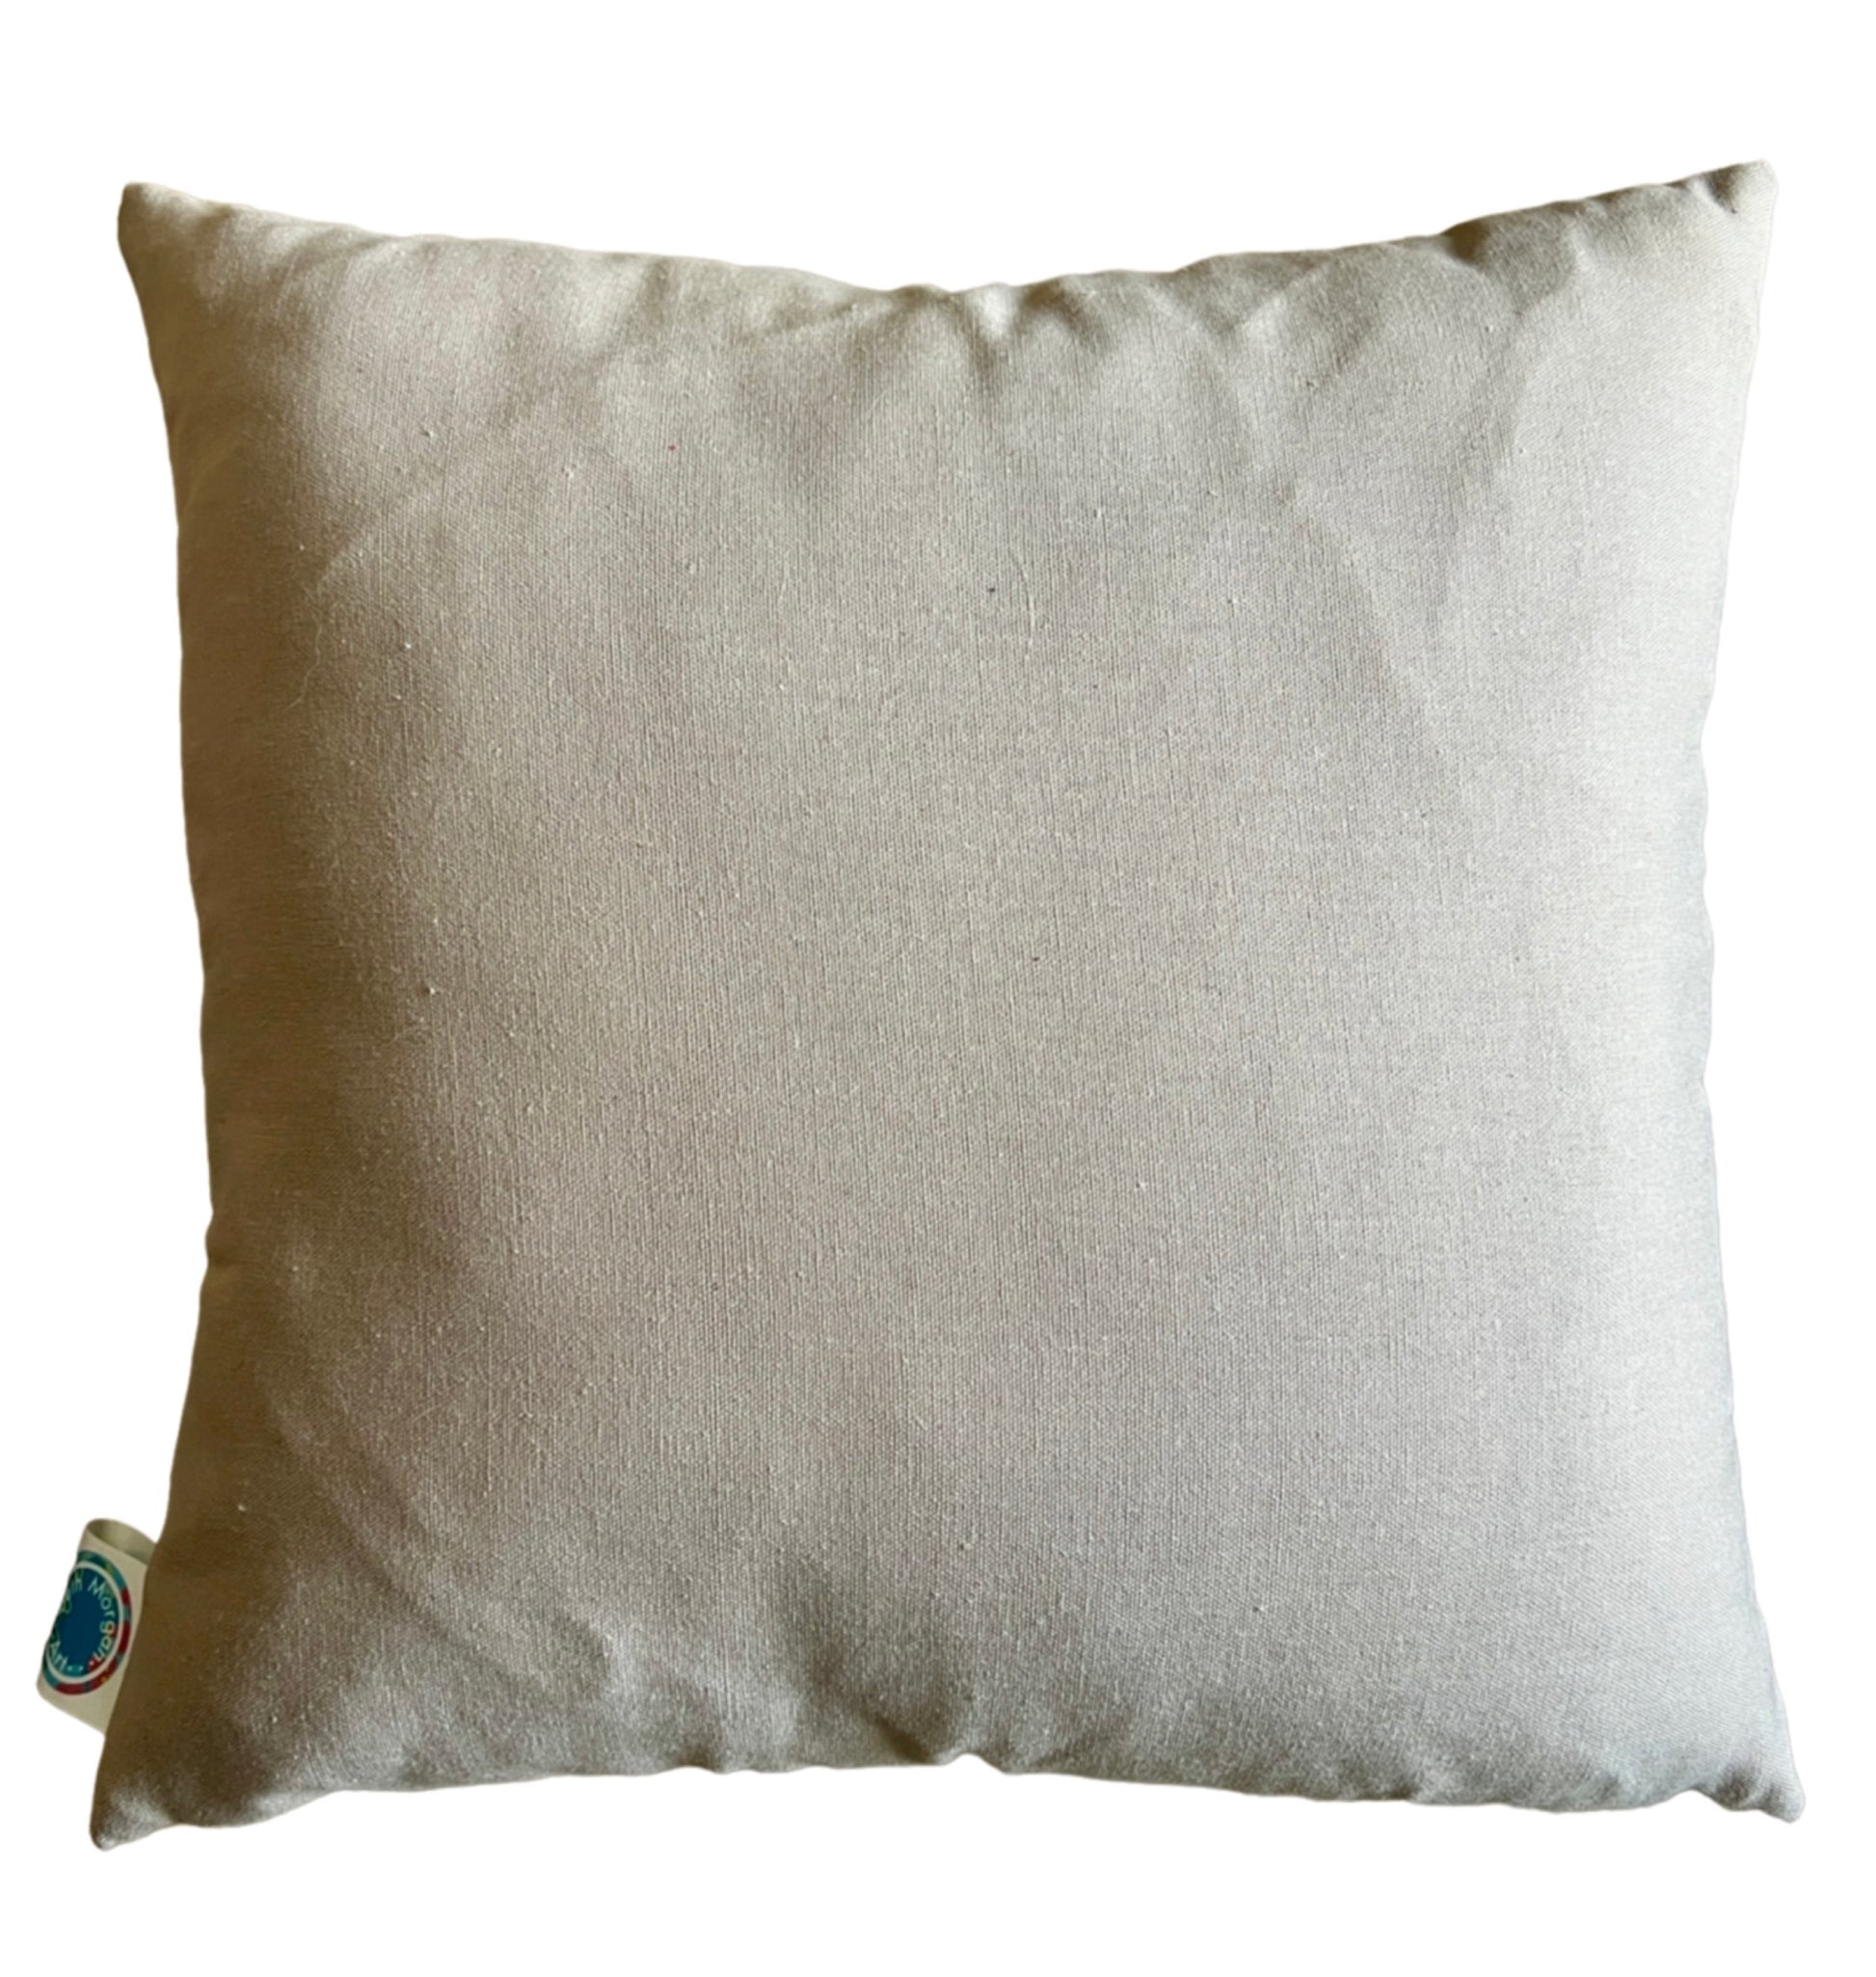 The back of the Clear Blue Skies Cushion made of plain beige fabric.